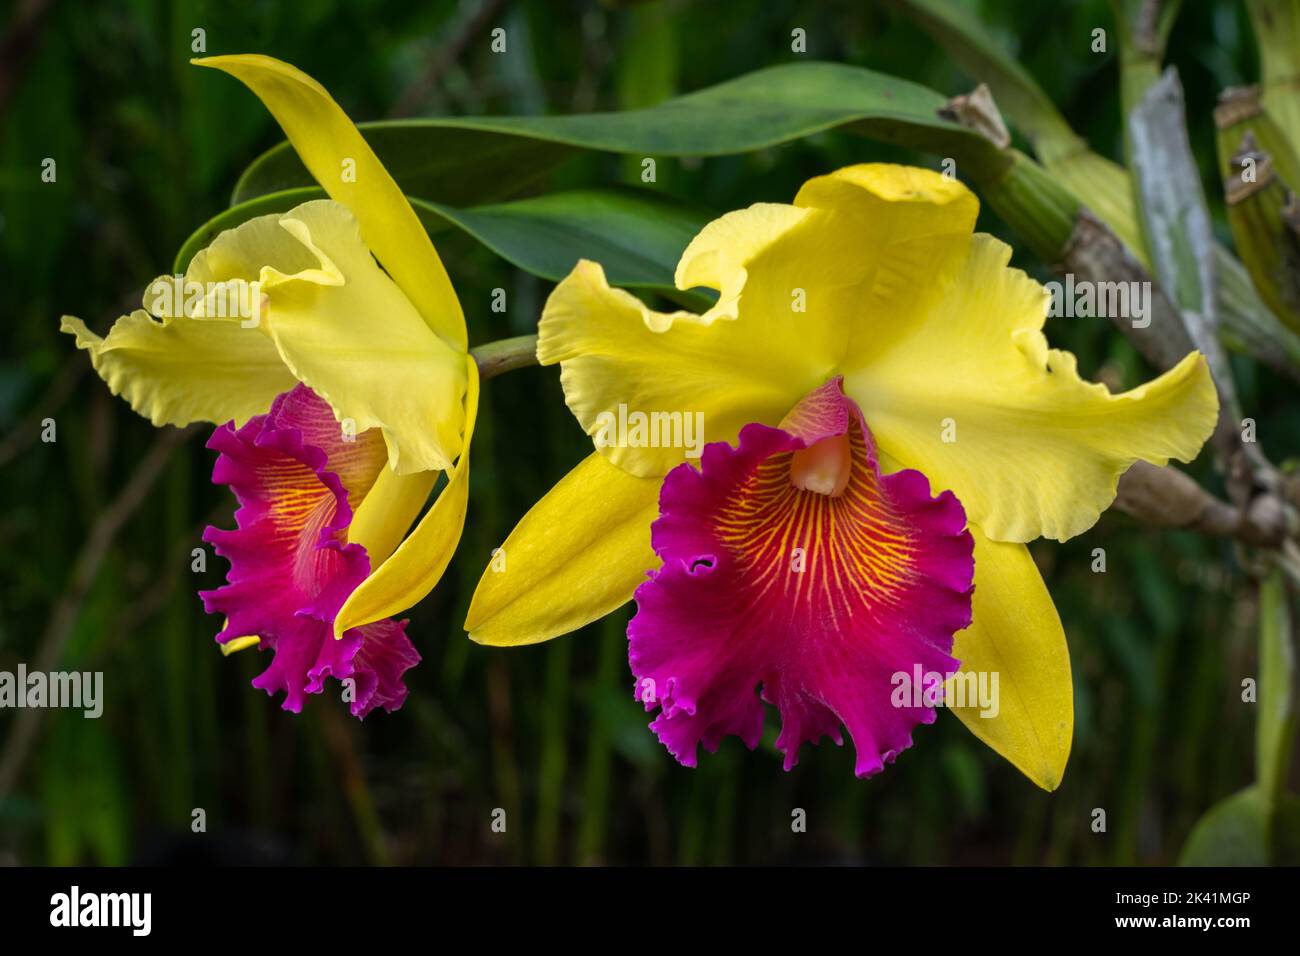 Closeup view of beautiful bright yellow and purple cattleya hybrid orchid flowers on natural background Stock Photo